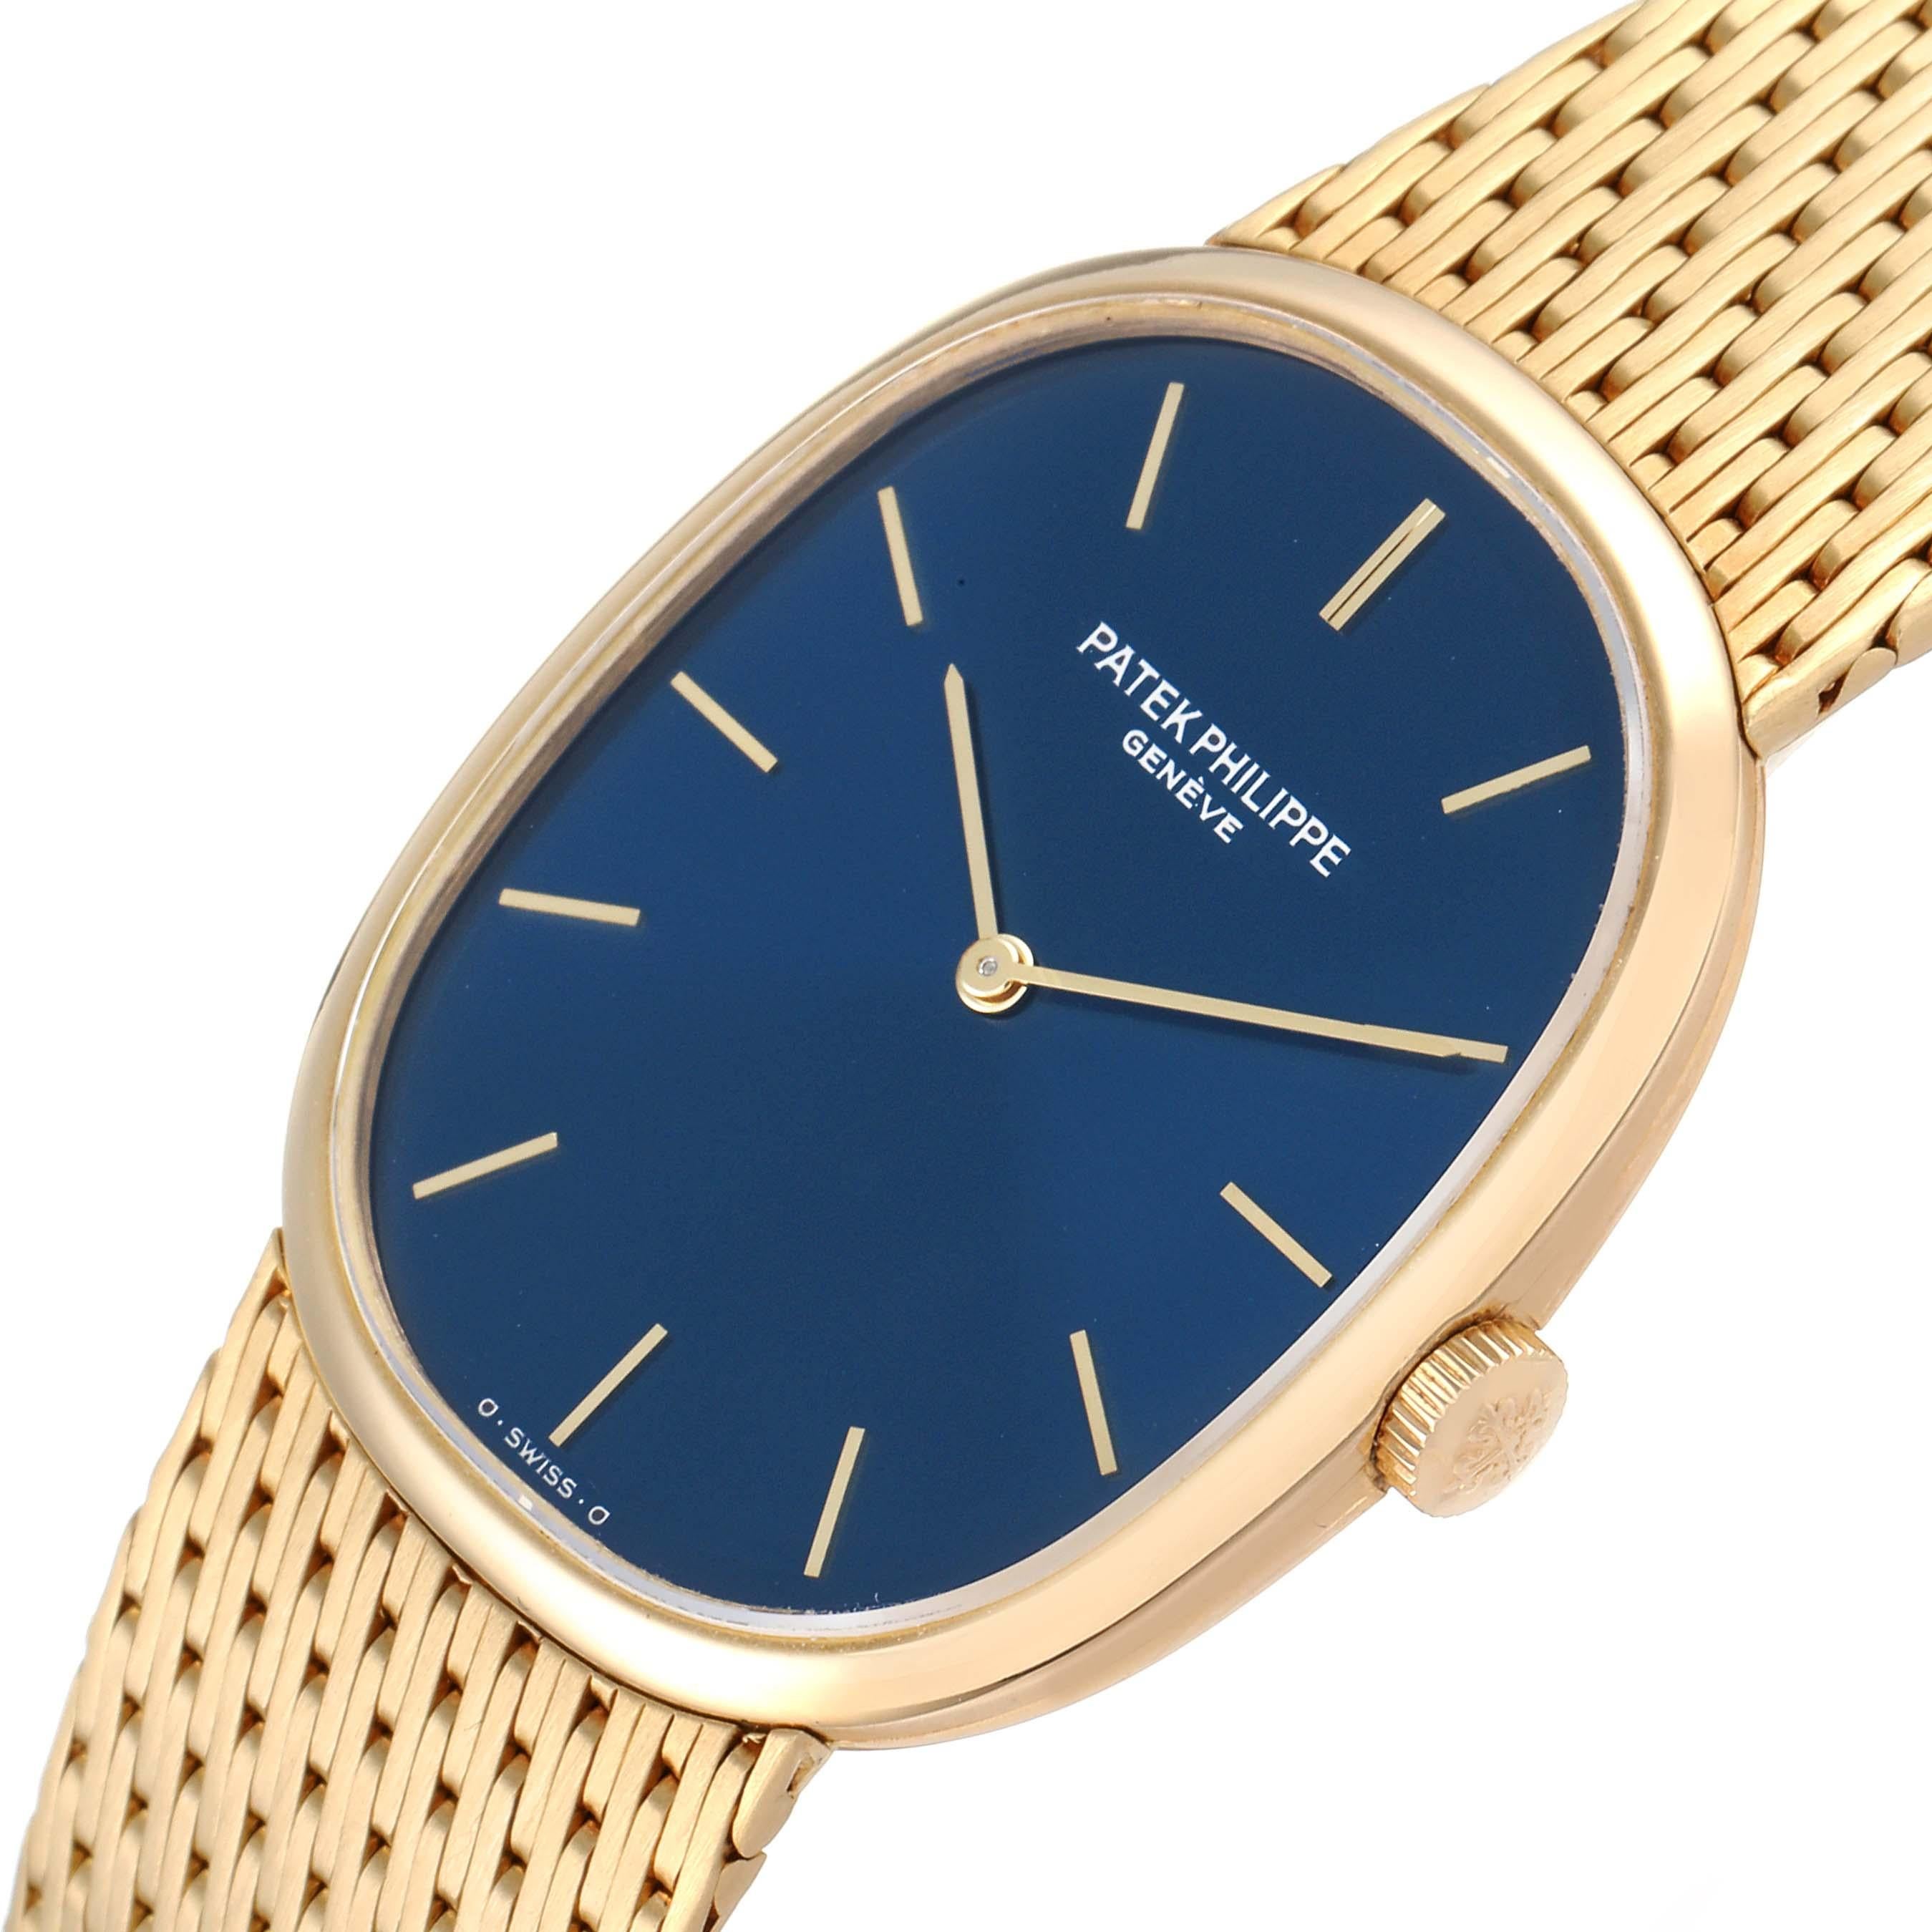 Patek Philippe Golden Ellipse 18k Yellow Gold Blue Dial Watch 3748 In Excellent Condition For Sale In Atlanta, GA